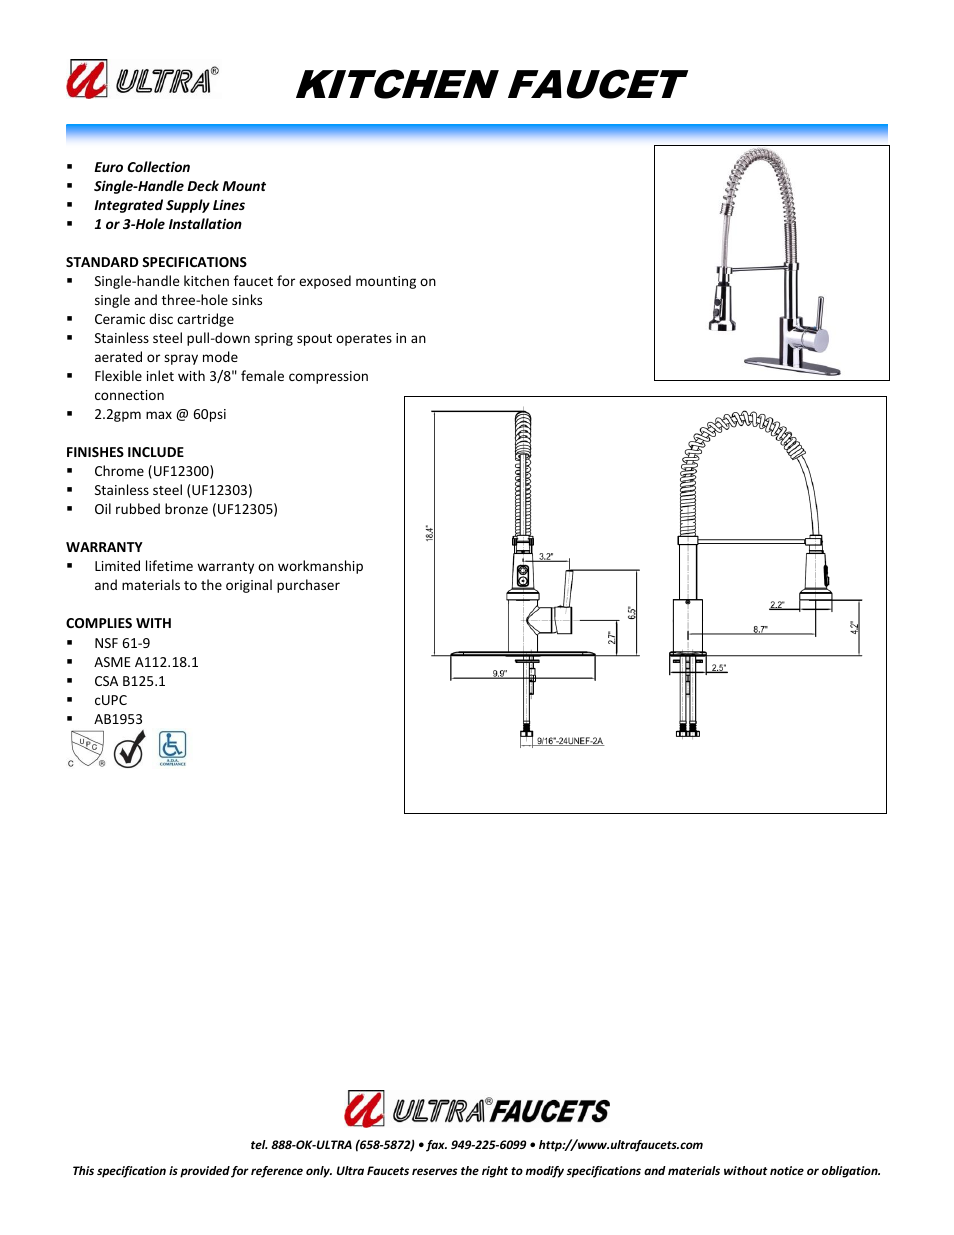 "EURO COLLECTIONSINGLE-HANDLE KITCHEN FAUCET WITH SPRING SPOUT"